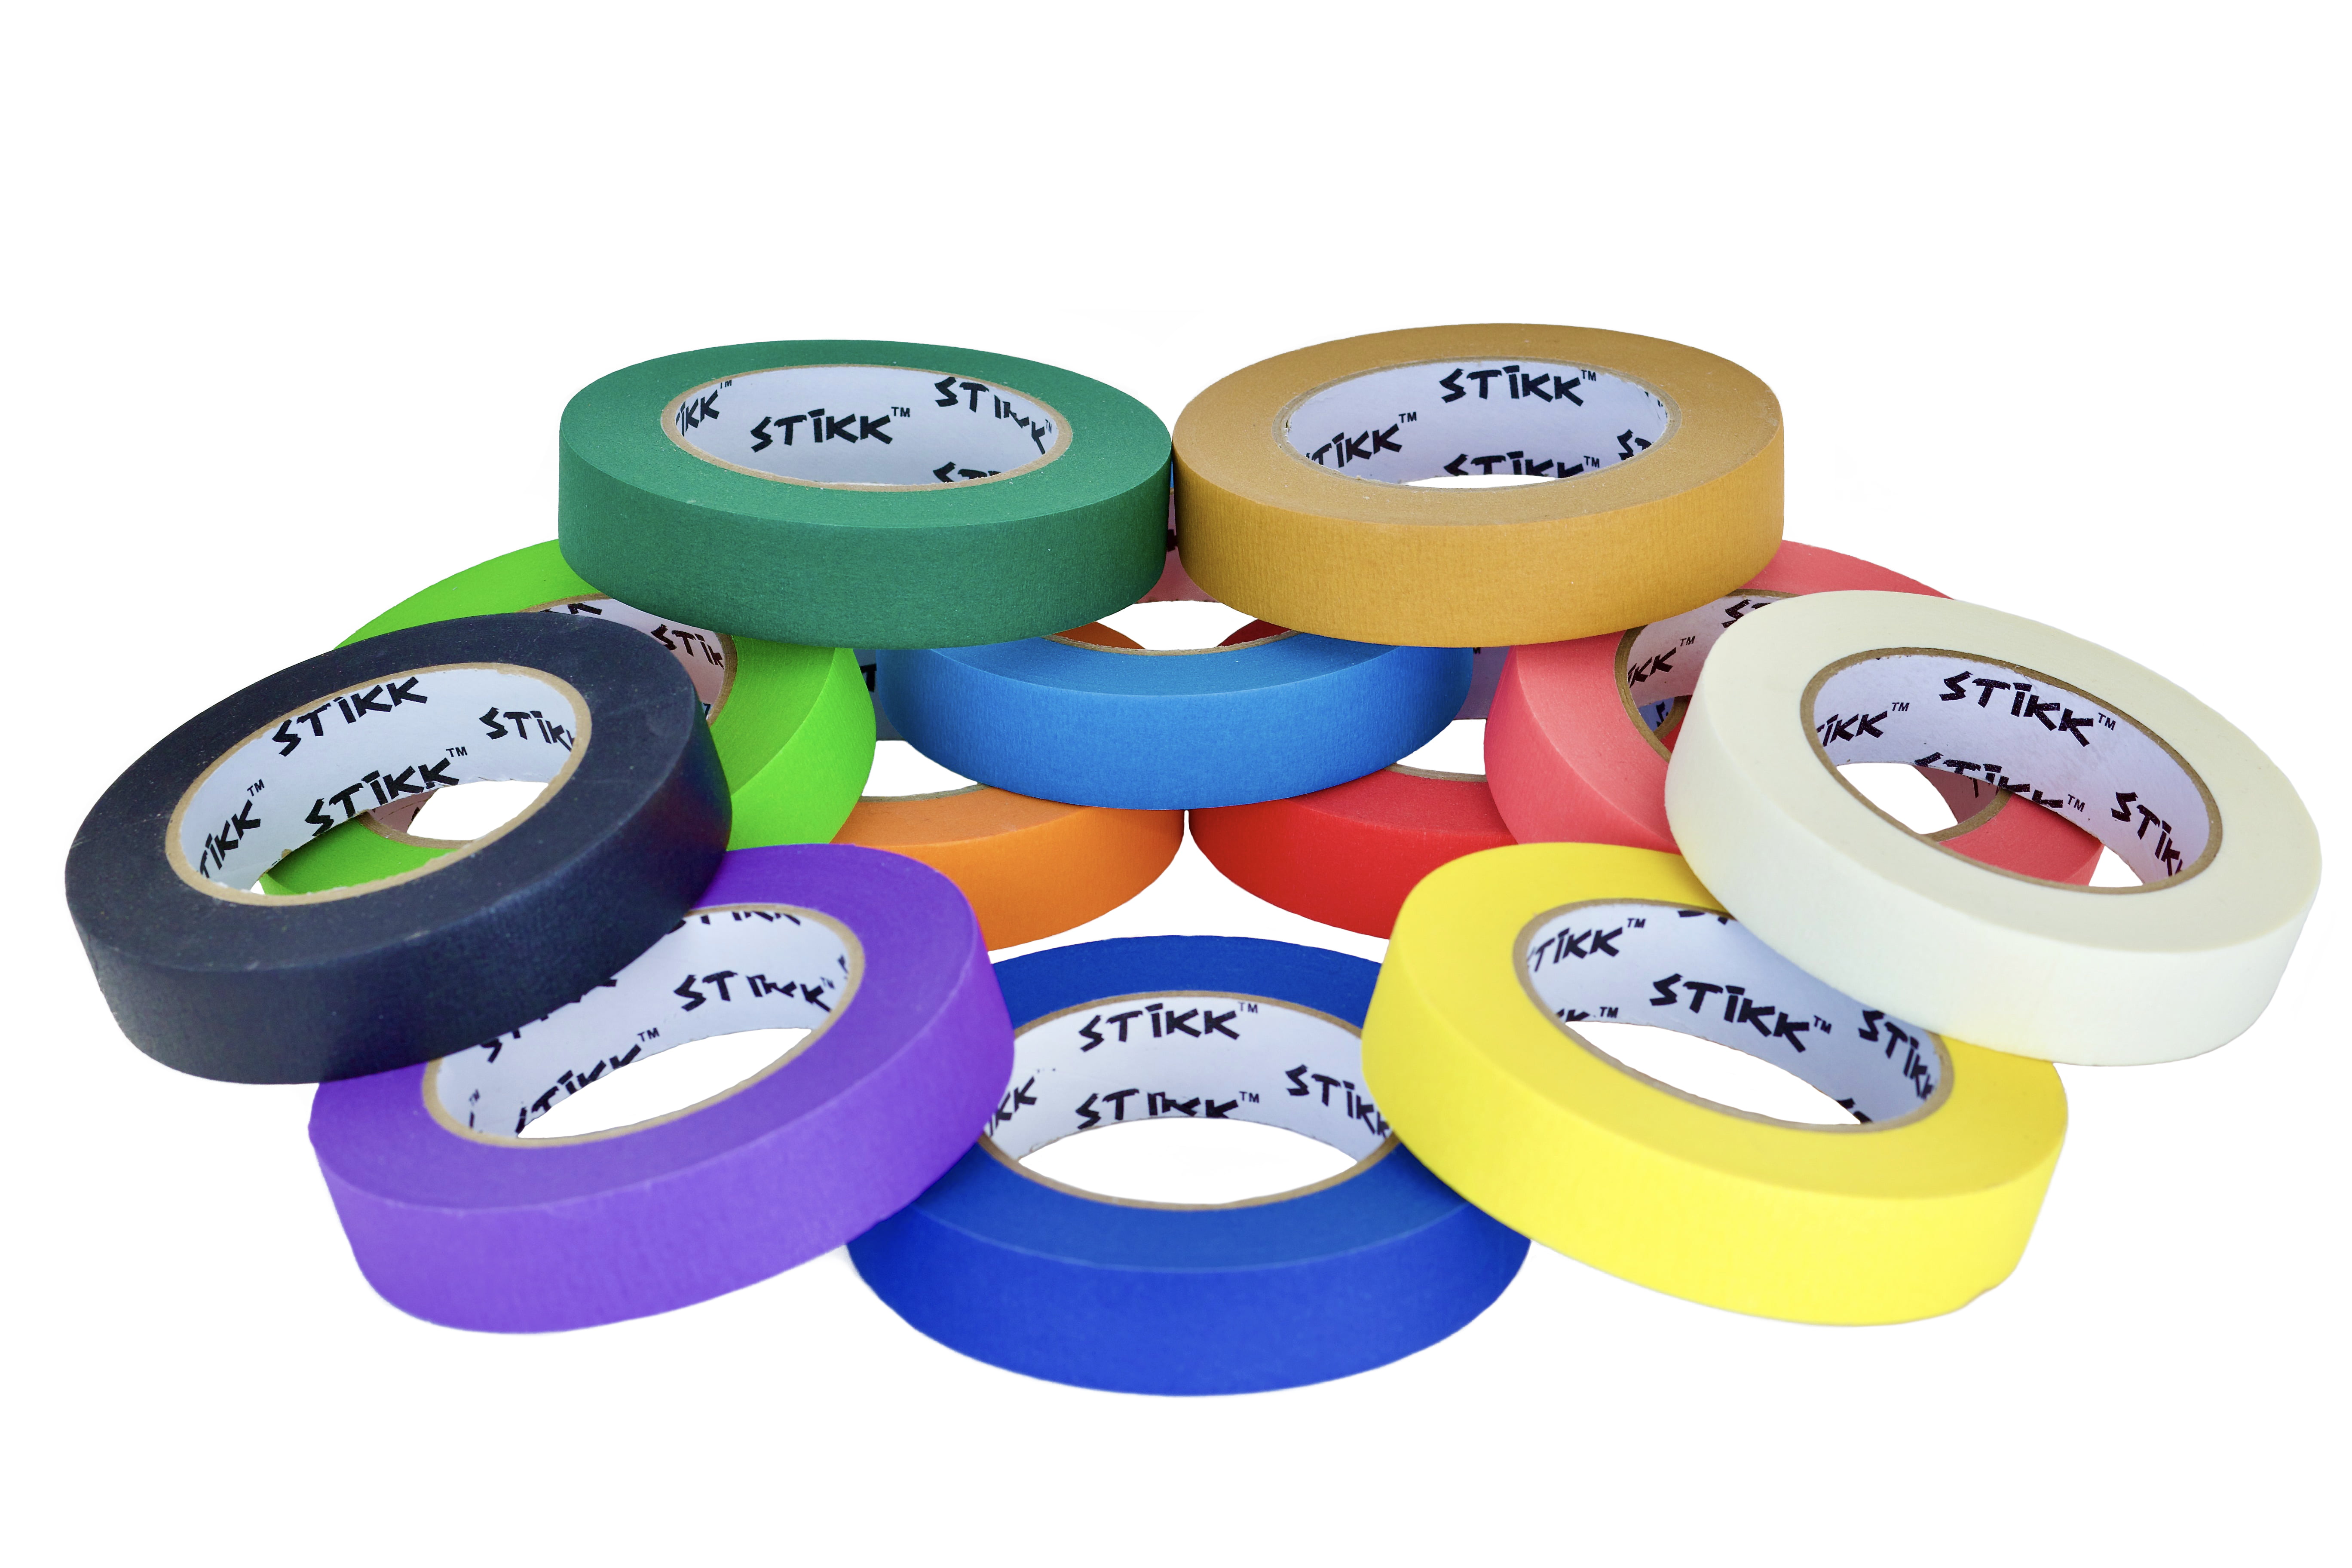 1 Roll Masking Tape very Thin Basic Colors, Berry Pink, 5mm7meters 